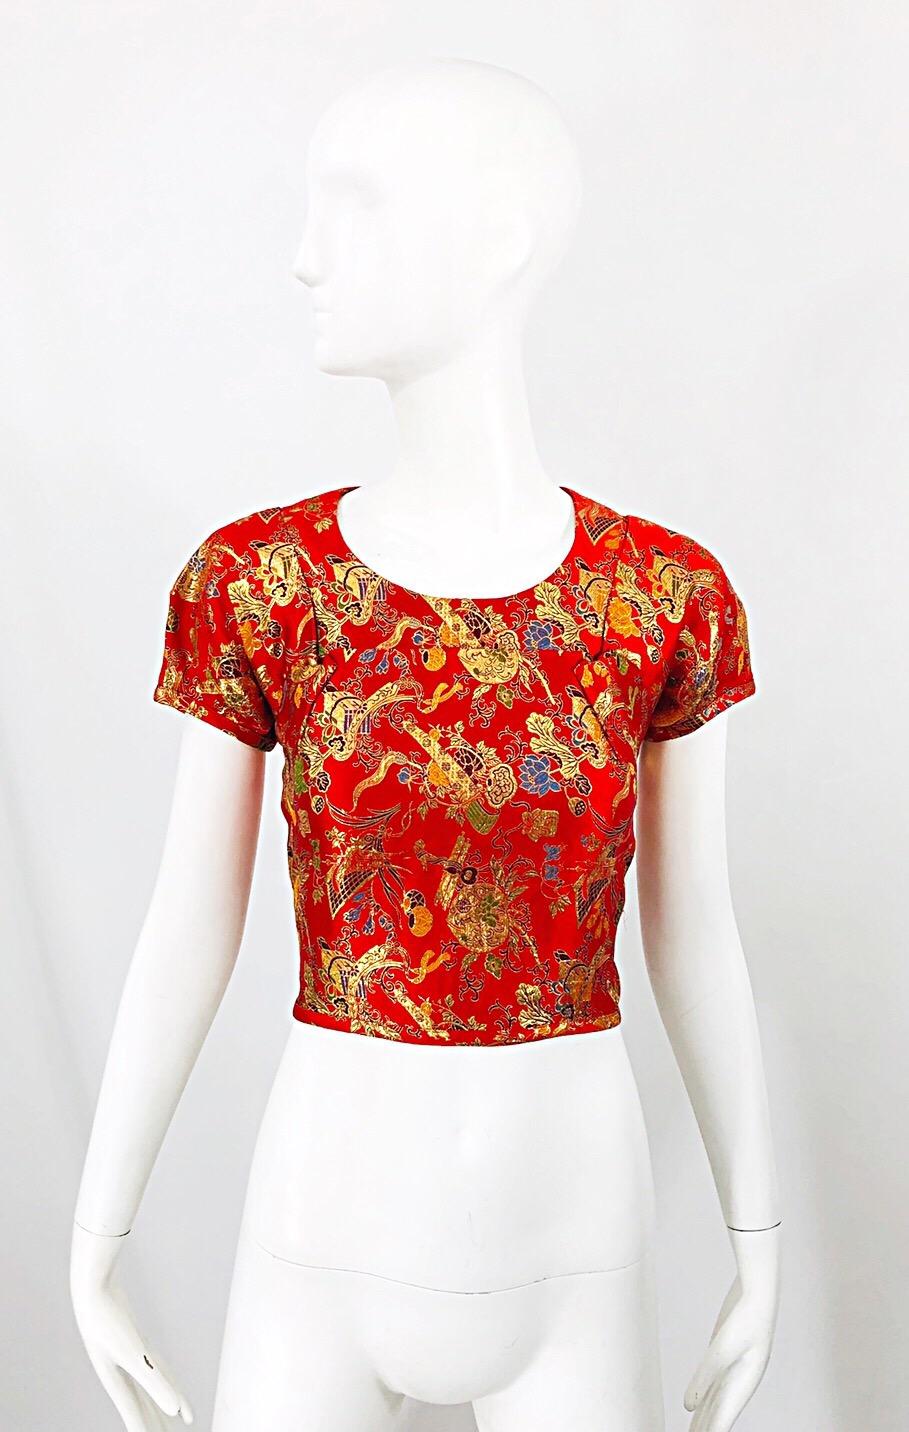 Rare 1990s vintage COMME DES GARCONS / JUNYA WATANABE Asian themed lipstick red crop top! Features vibrant colors of blue, gold, orange, green, red purple and black throughout. Stylish origami like sleeves fold in the back. Hidden zipper down the